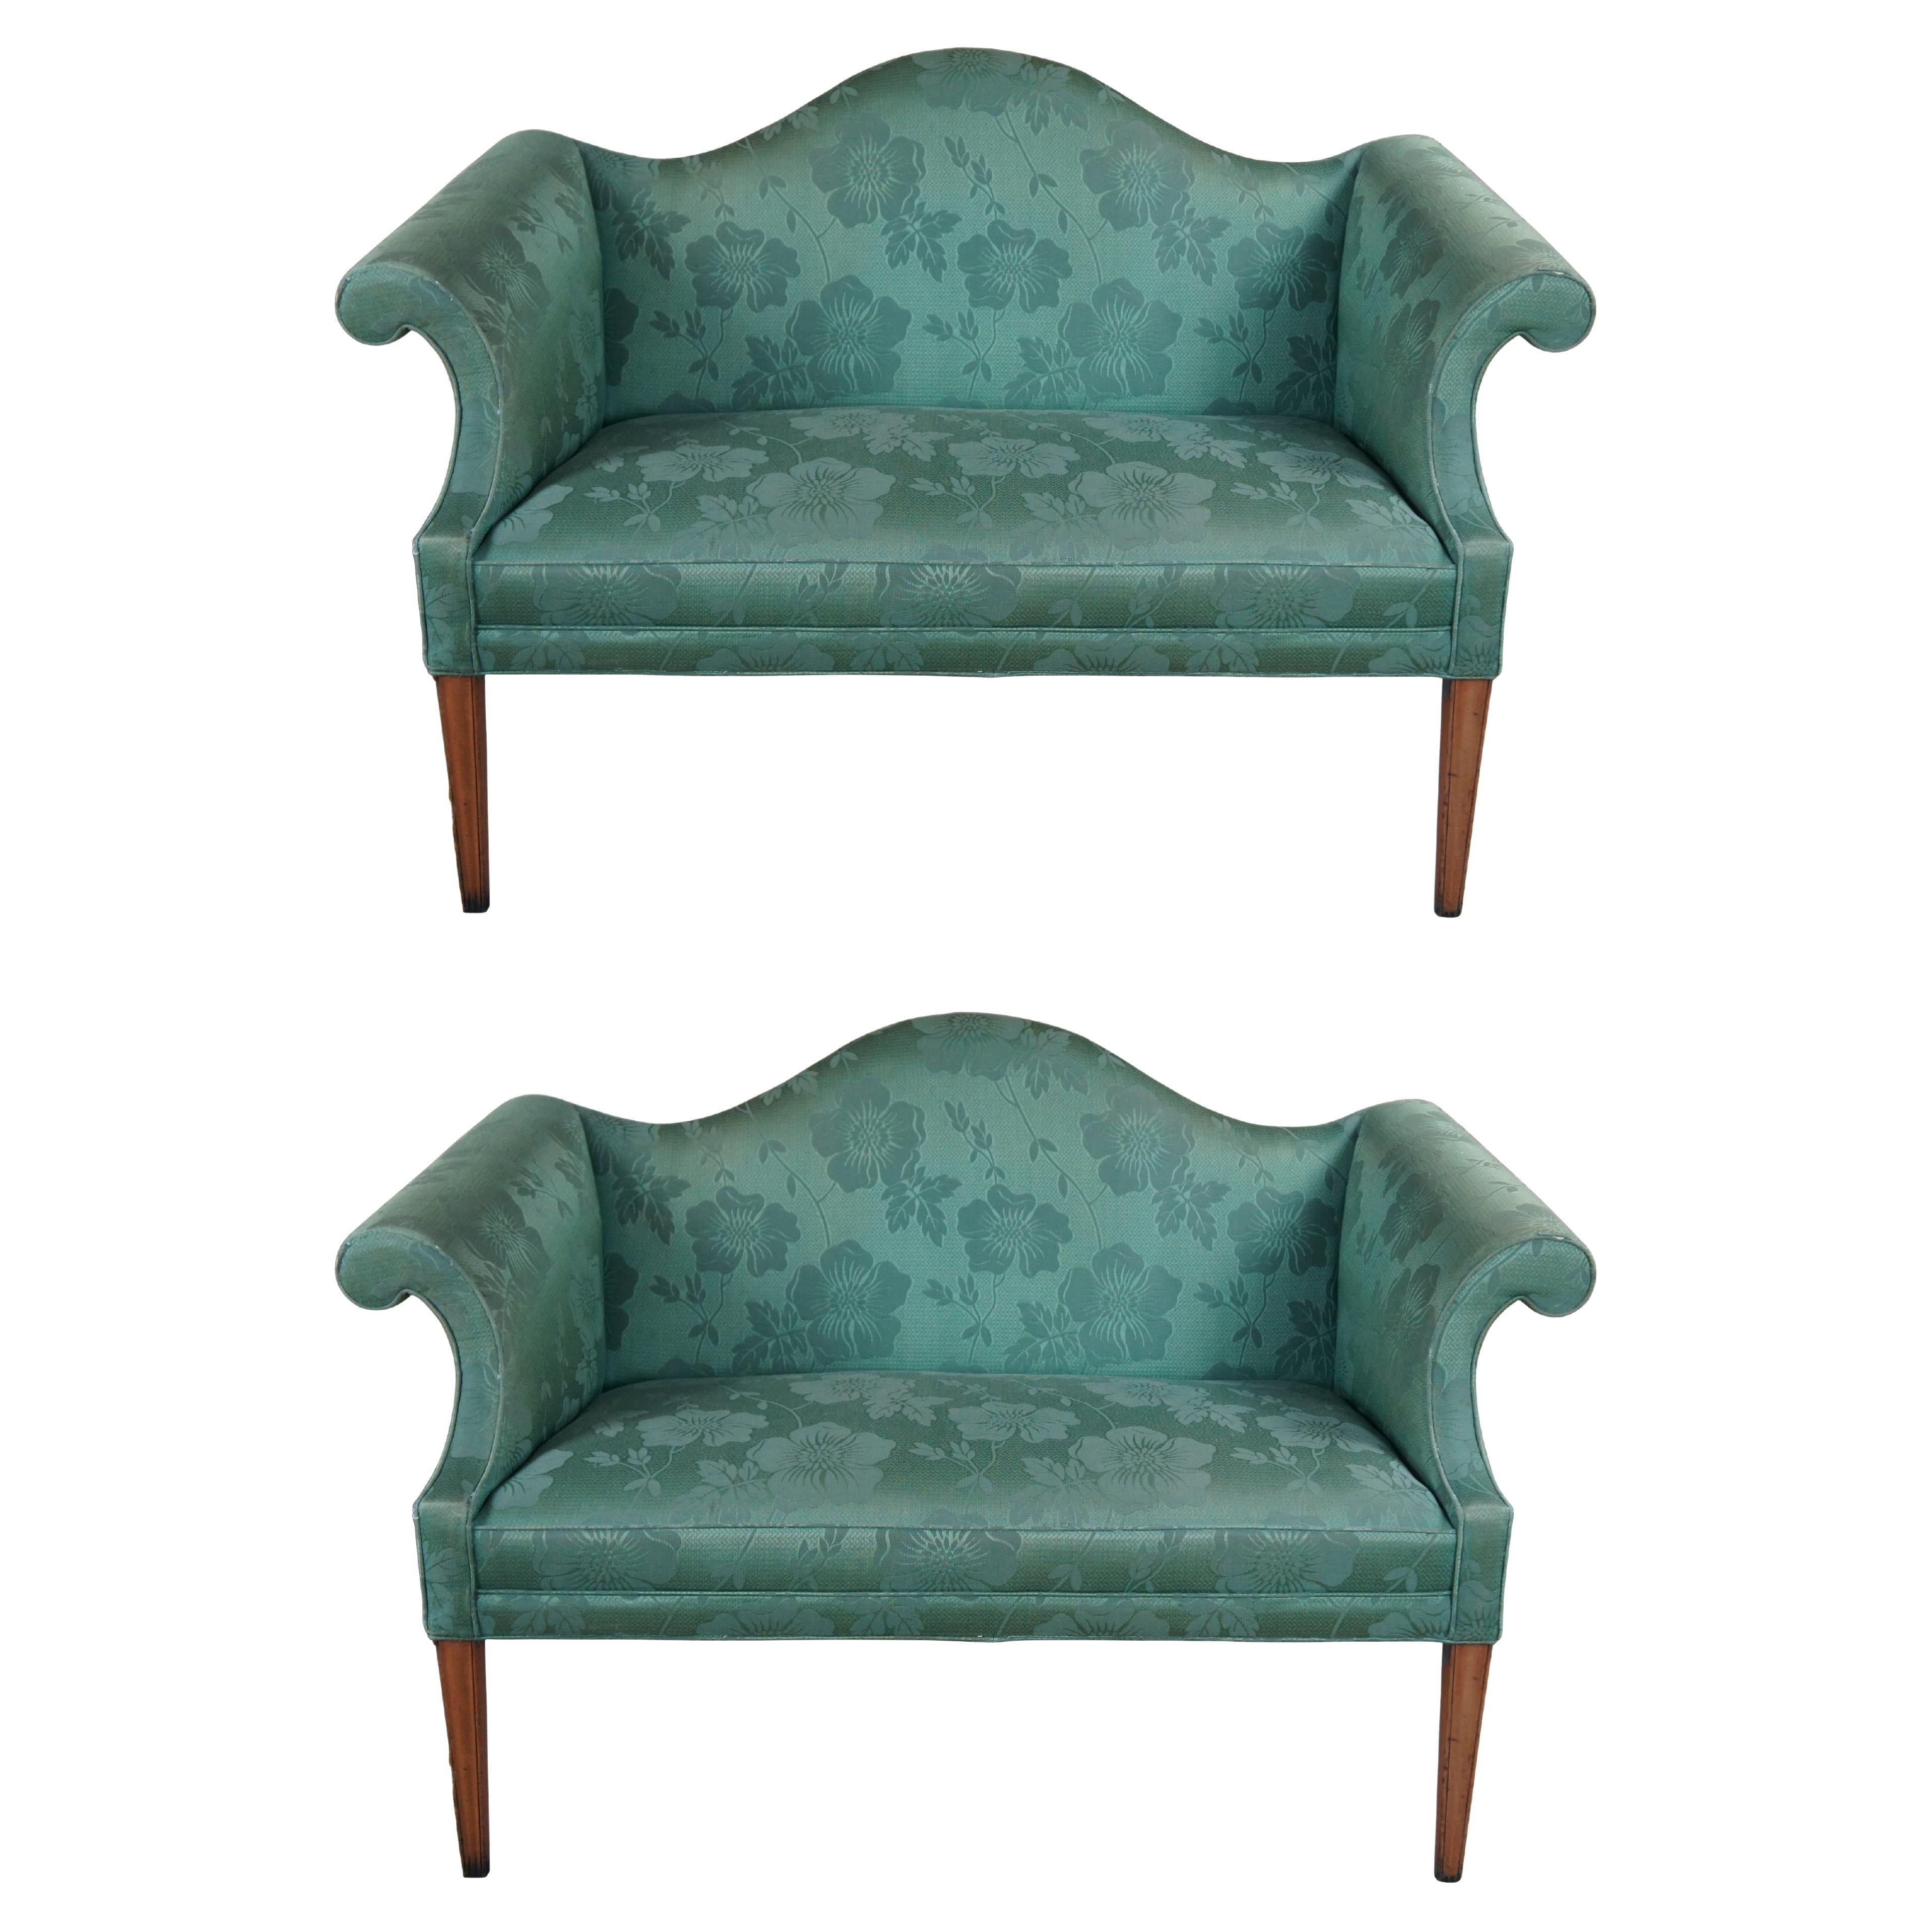 2 Drexel Heritage Federal Style Mahogany Camelback Green Floral Loveseats Settee